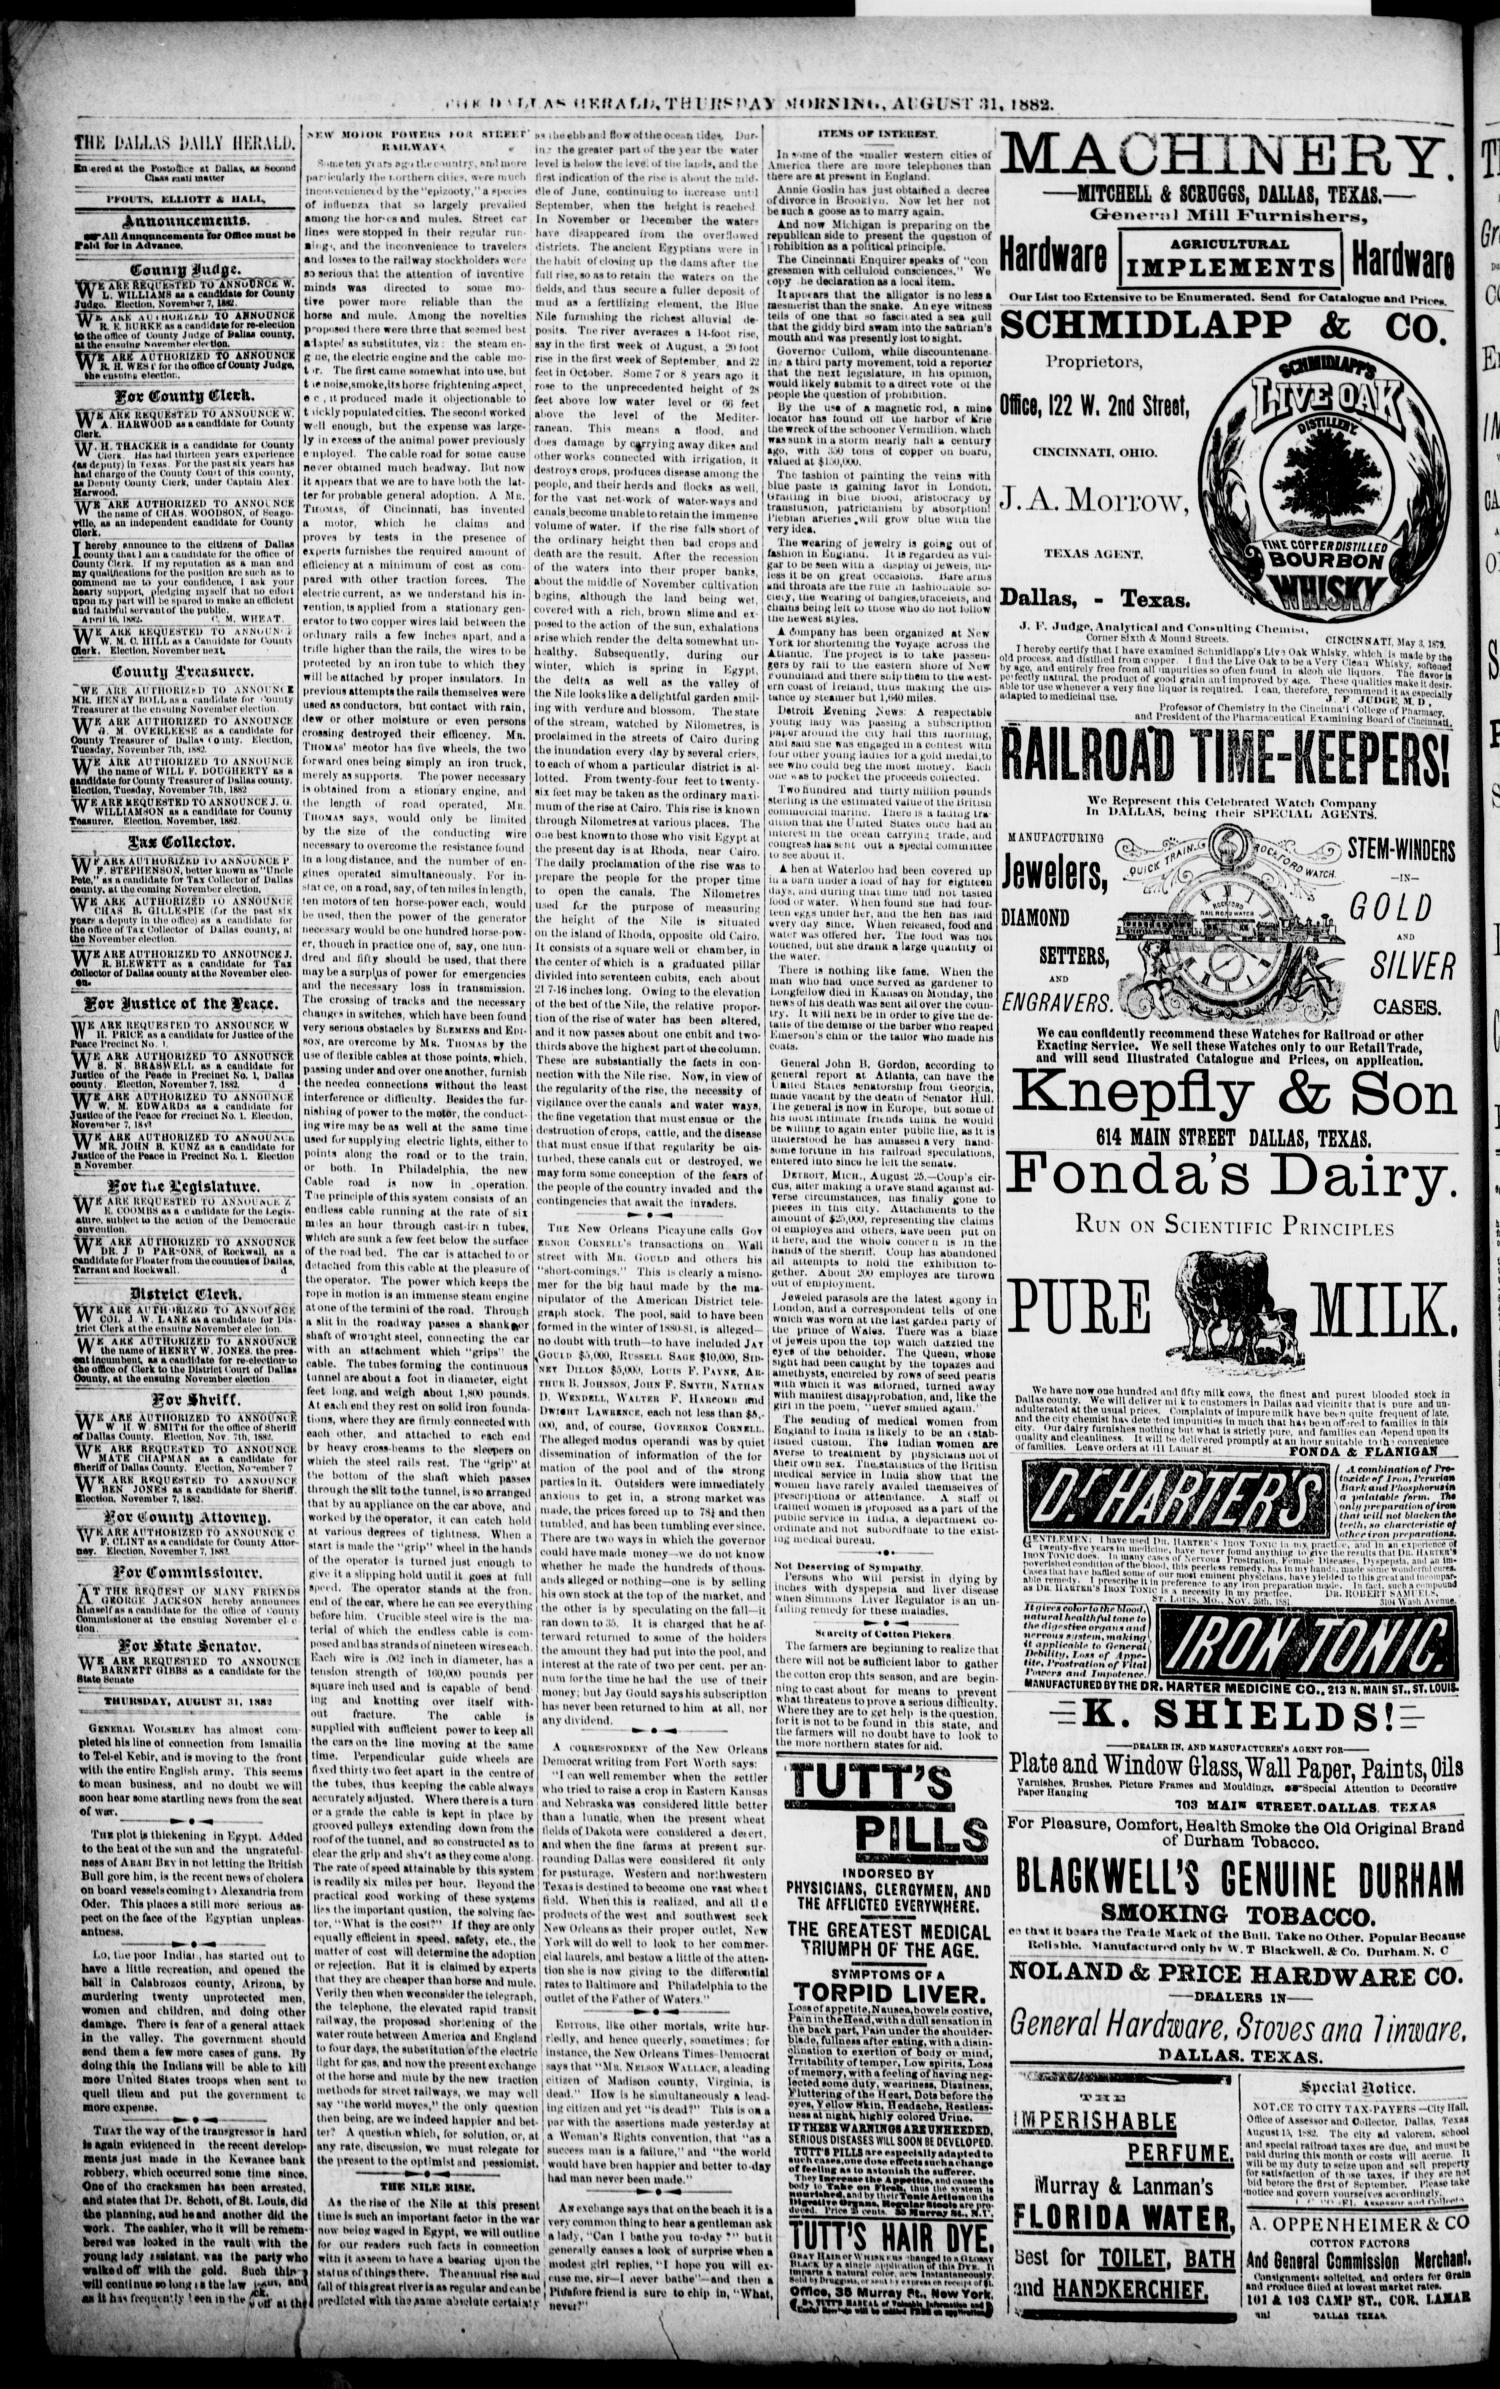 The Dallas Daily Herald. (Dallas, Tex.), Vol. 29, No. 331, Ed. 1 Thursday,  August 31, 1882 - Page 4 of 8 - The Portal to Texas History